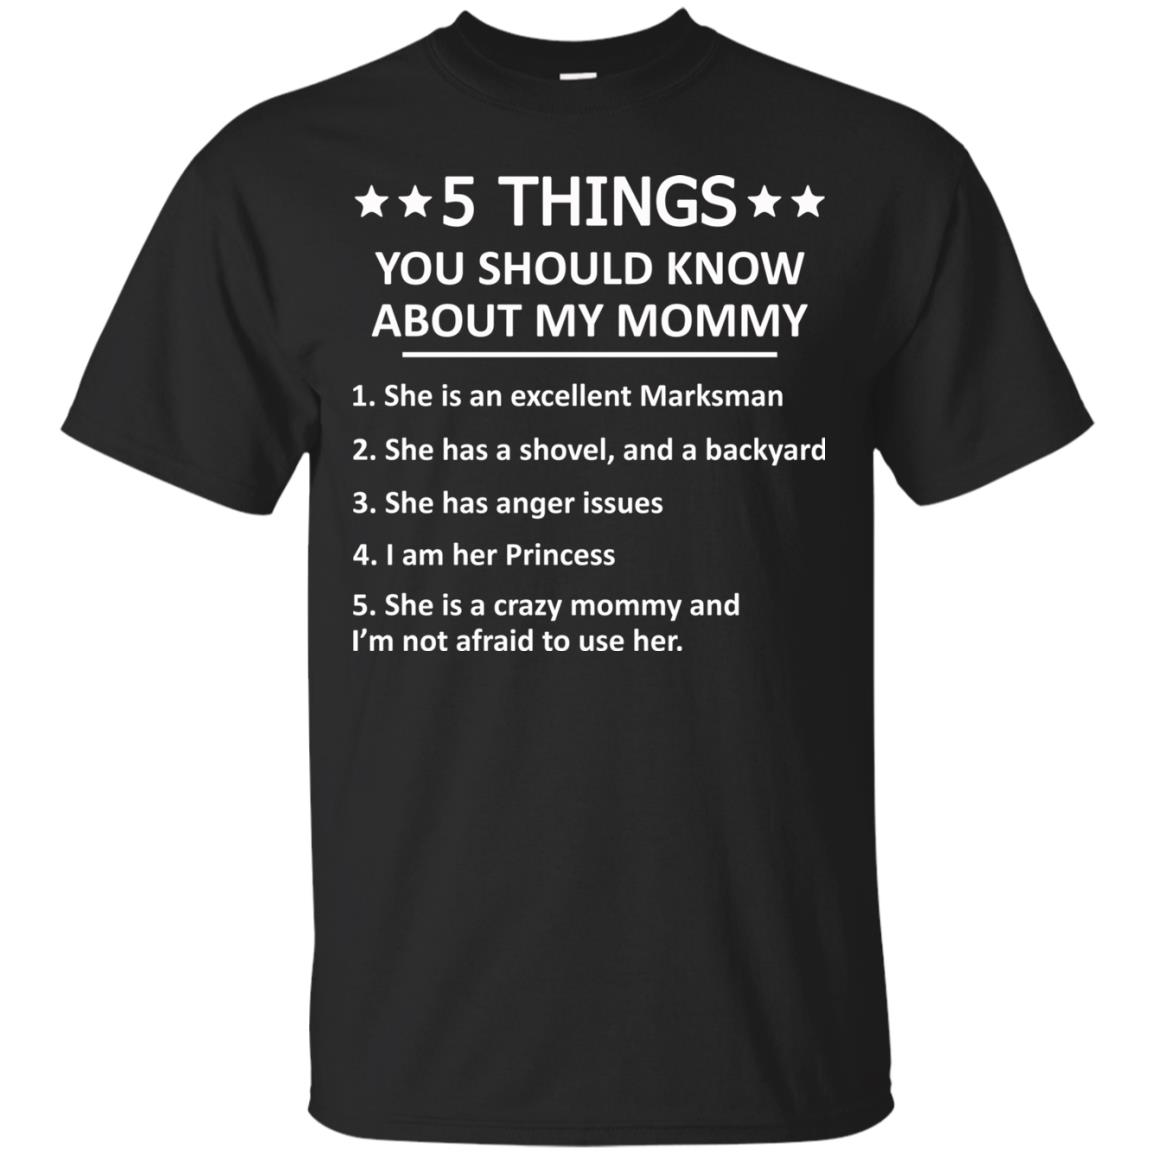 5 Things you should know about my mommy t shirt, hoodies, tank